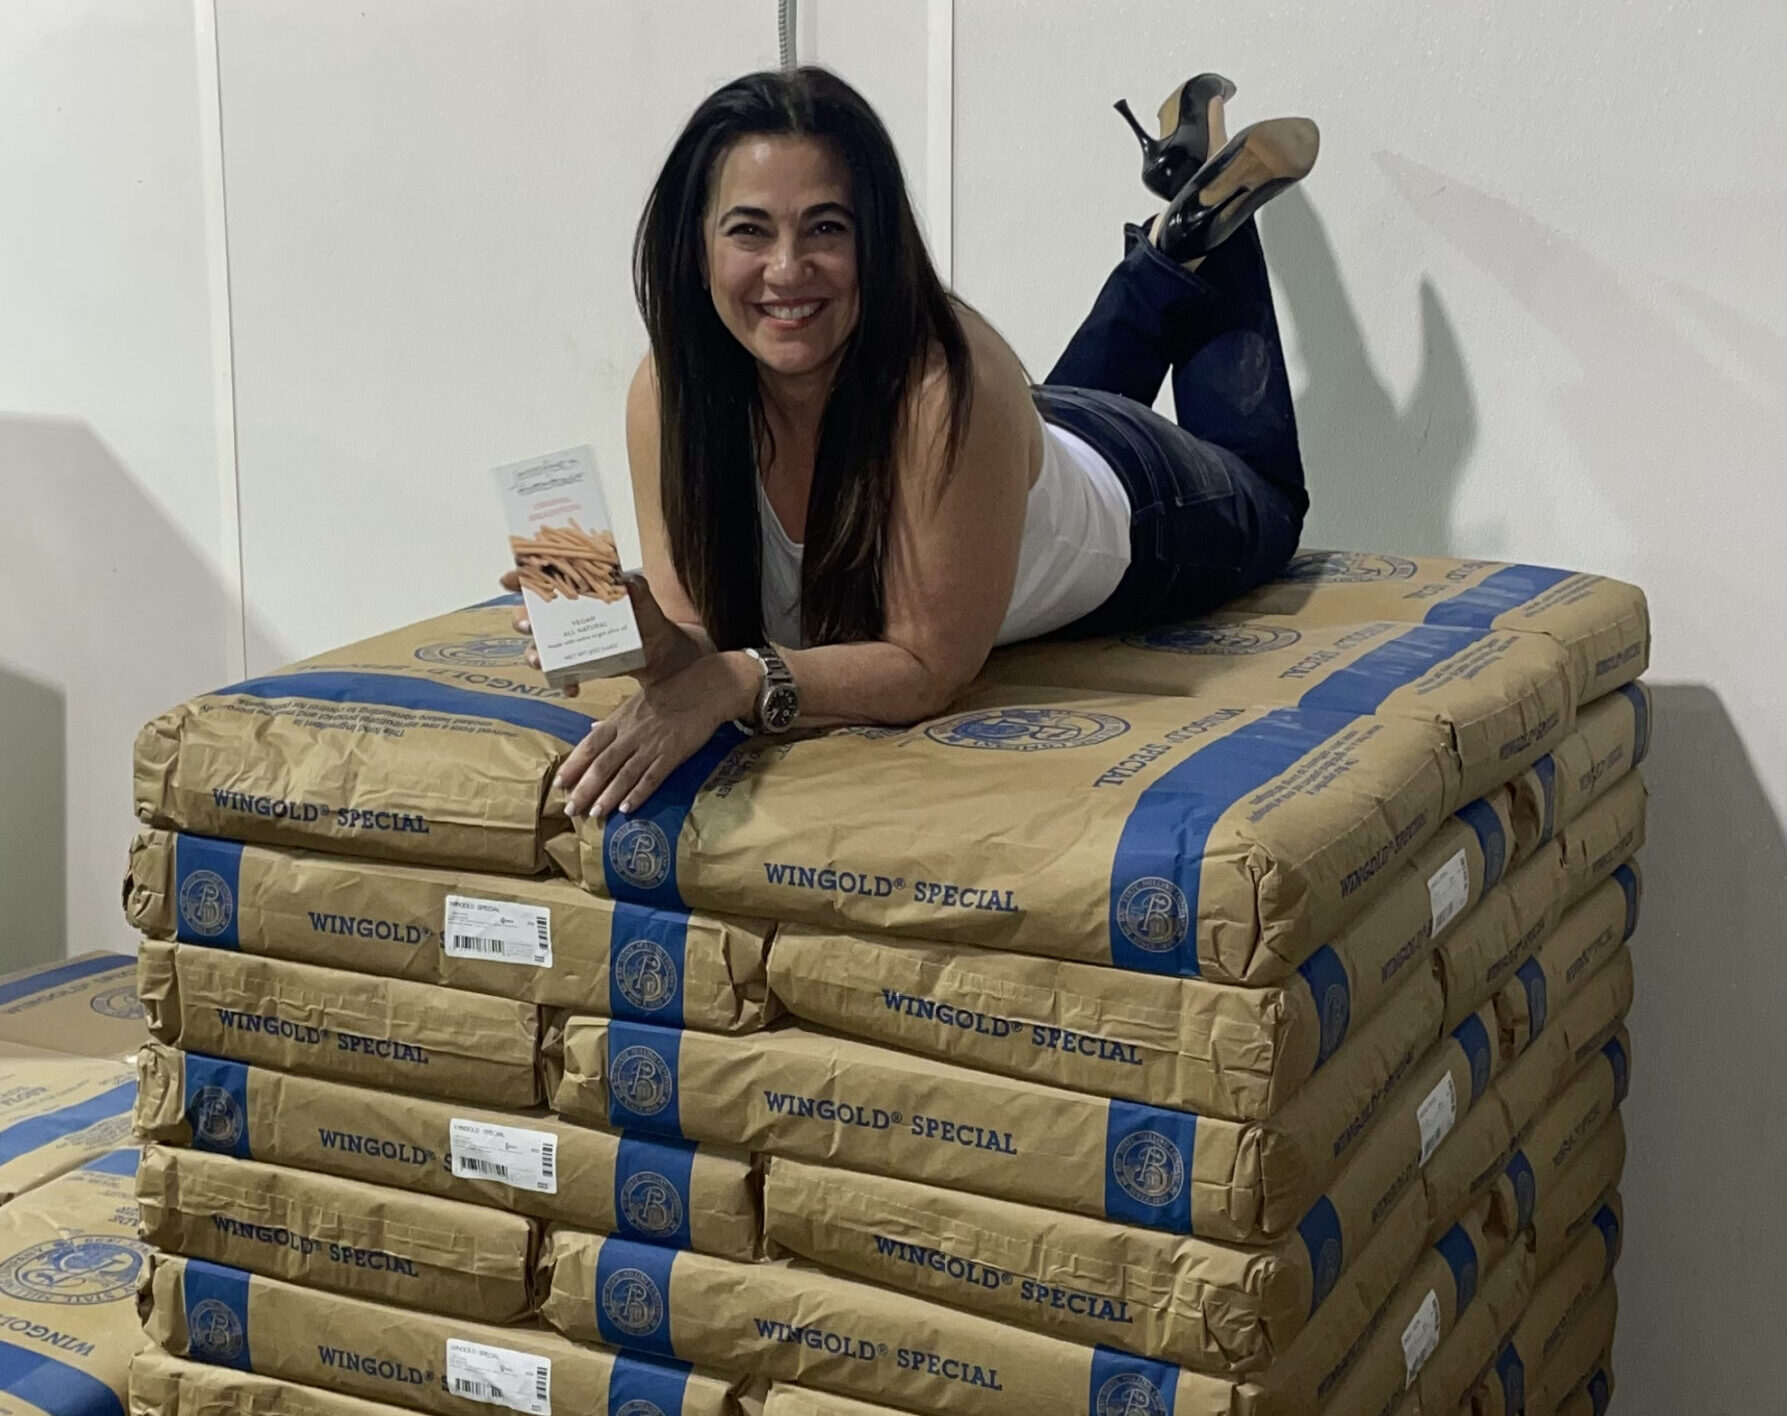 Jennifer laying on a pallet of flour holding a box of her homemade breadsticks and flatbreads